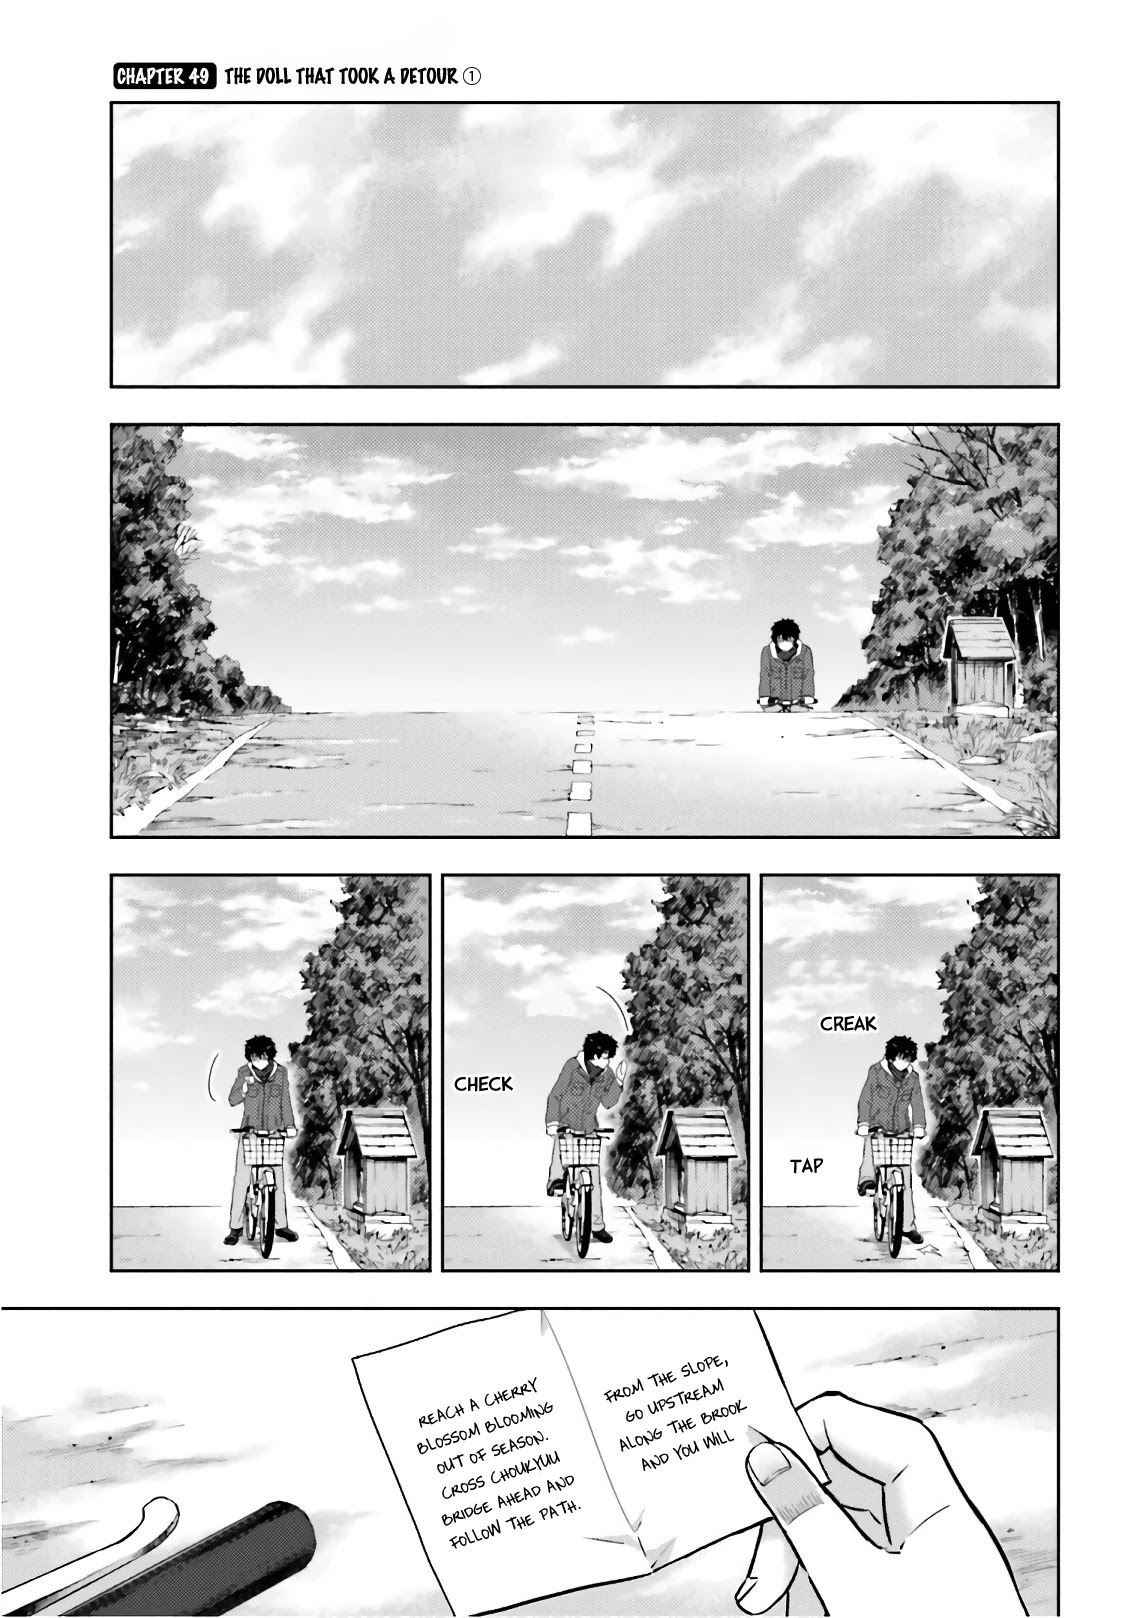 Hyouka Chapter 49: The Doll That Took A Detour ① - Picture 1